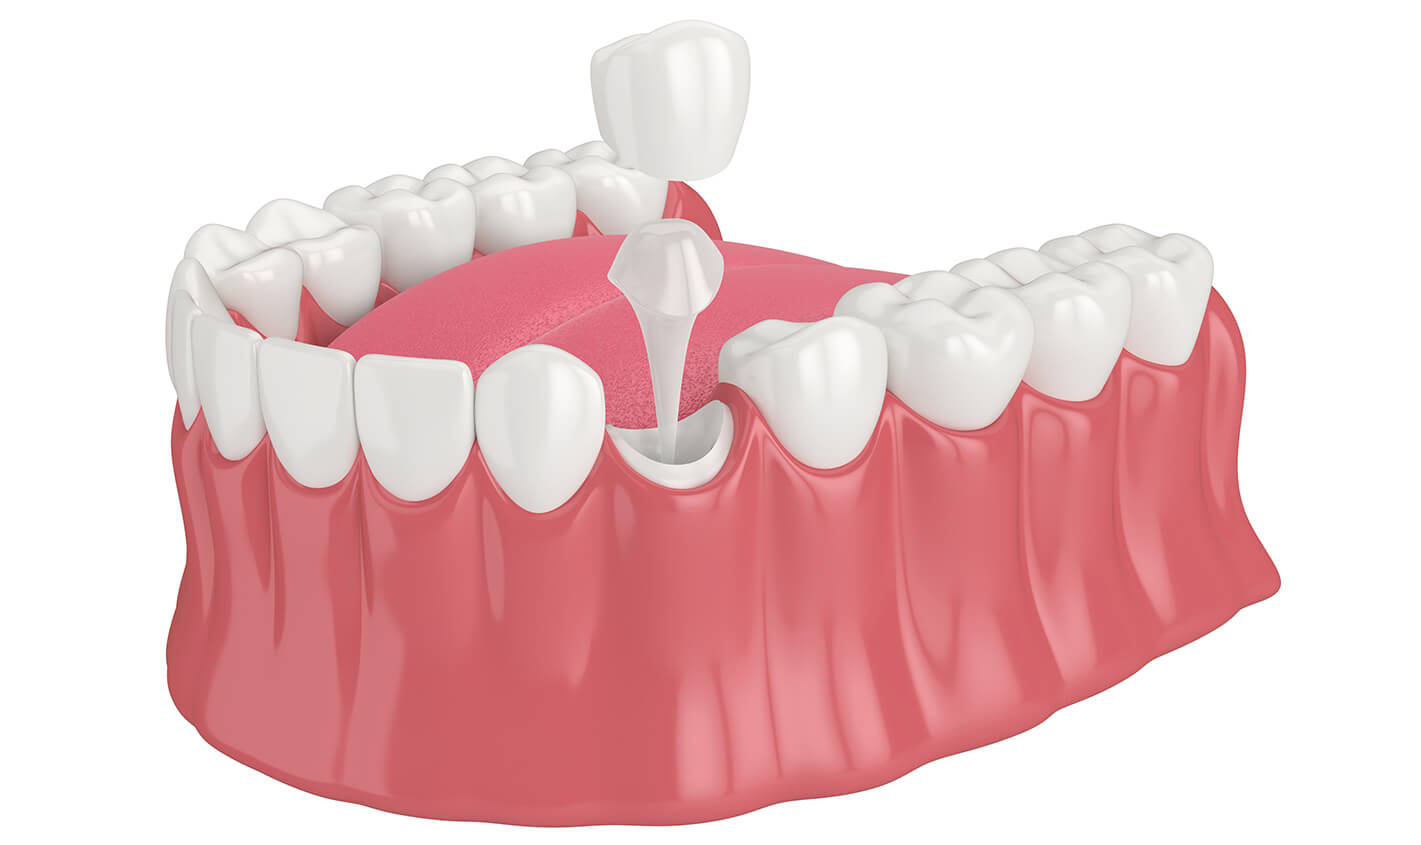 Dental Crown Replacement in Tucson AZ Area